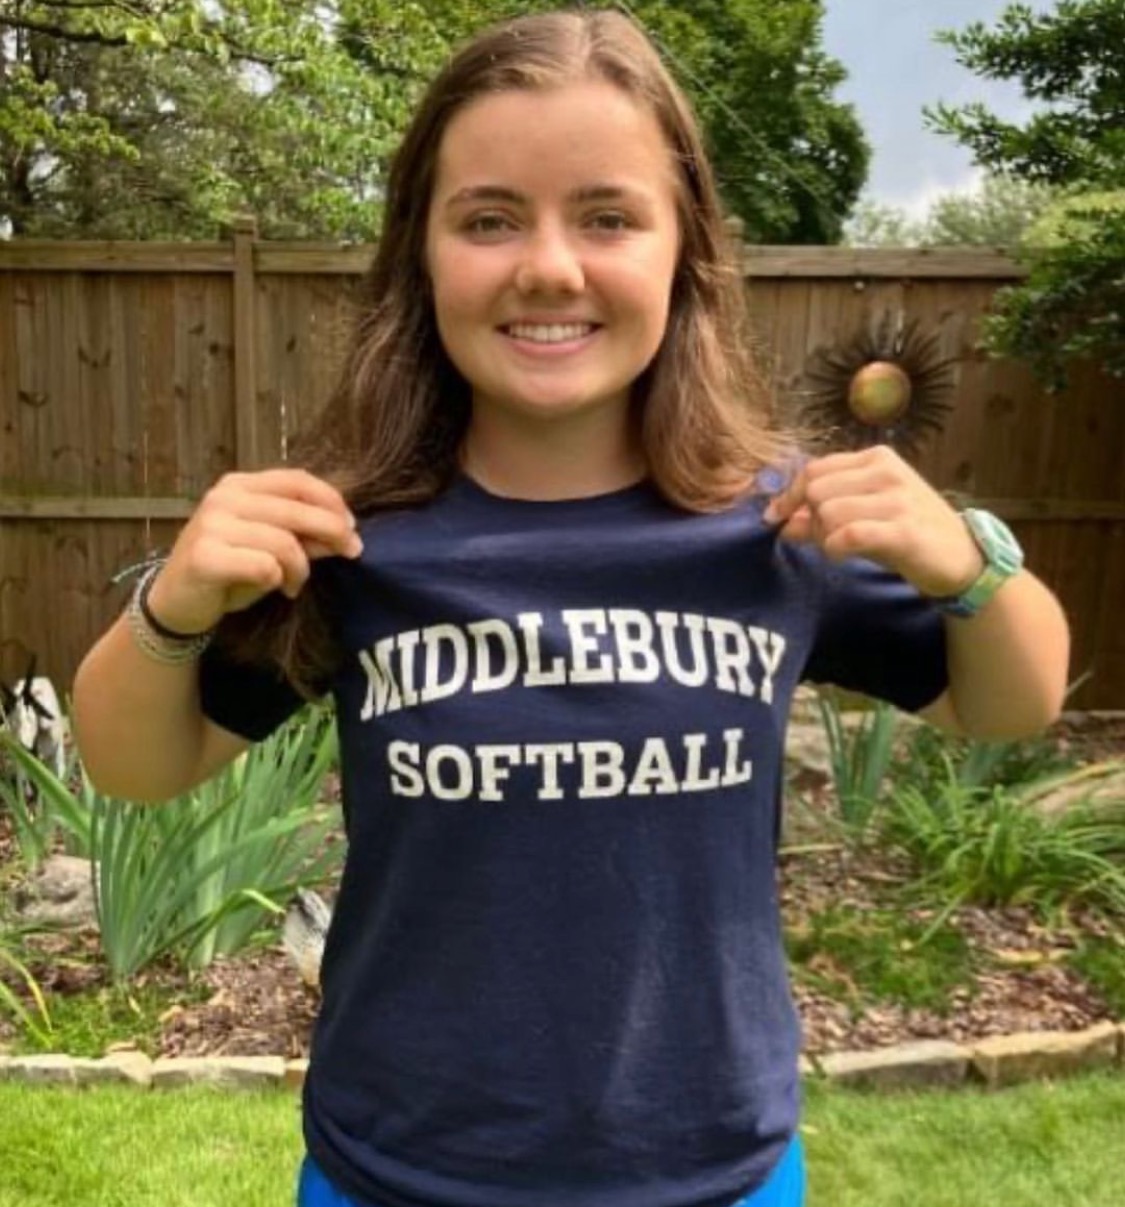 Senior Caitlin Stanley has been playing softball for over 10 years. Stanley said she is excited to get the opportunity to continue playing her sport and aspires to not lose sight of why she plays it.(Courtesy of Caitlin Stanley)